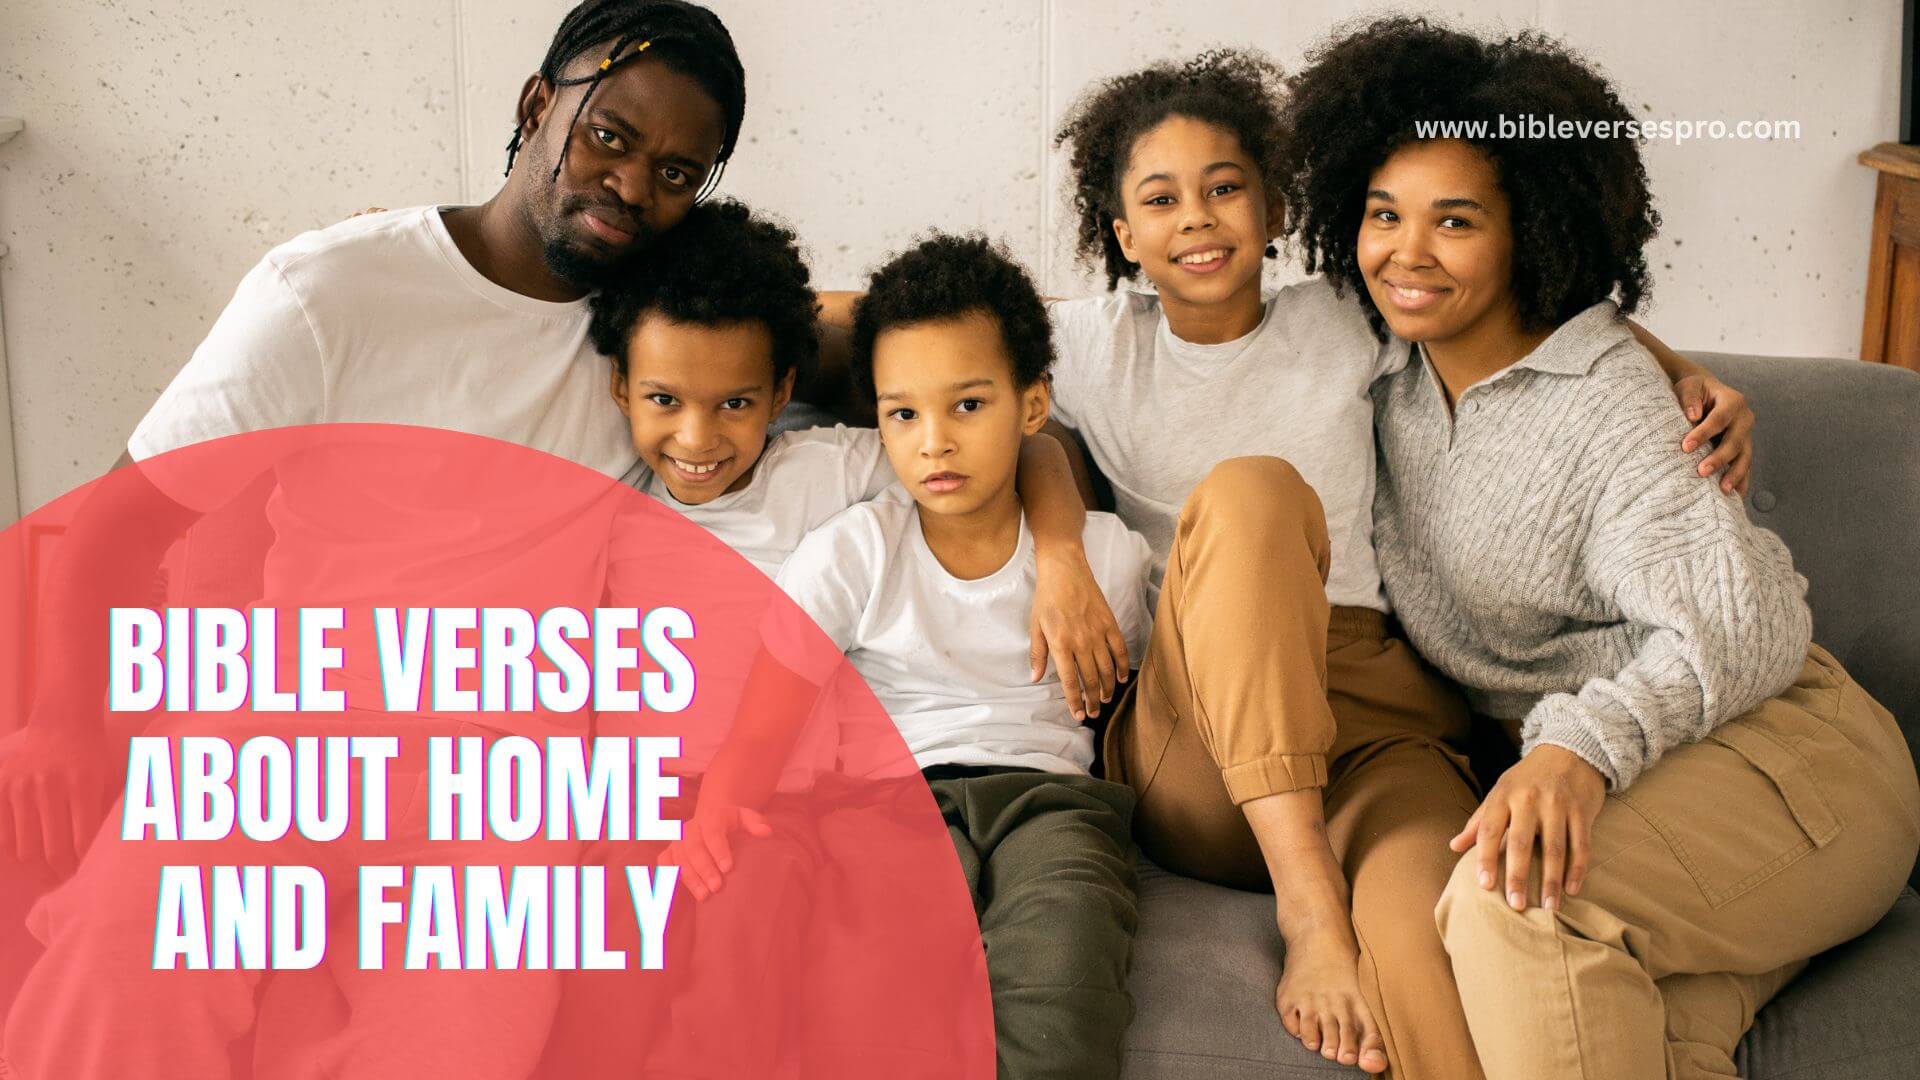 BIBLE VERSES ABOUT HOME AND FAMILY